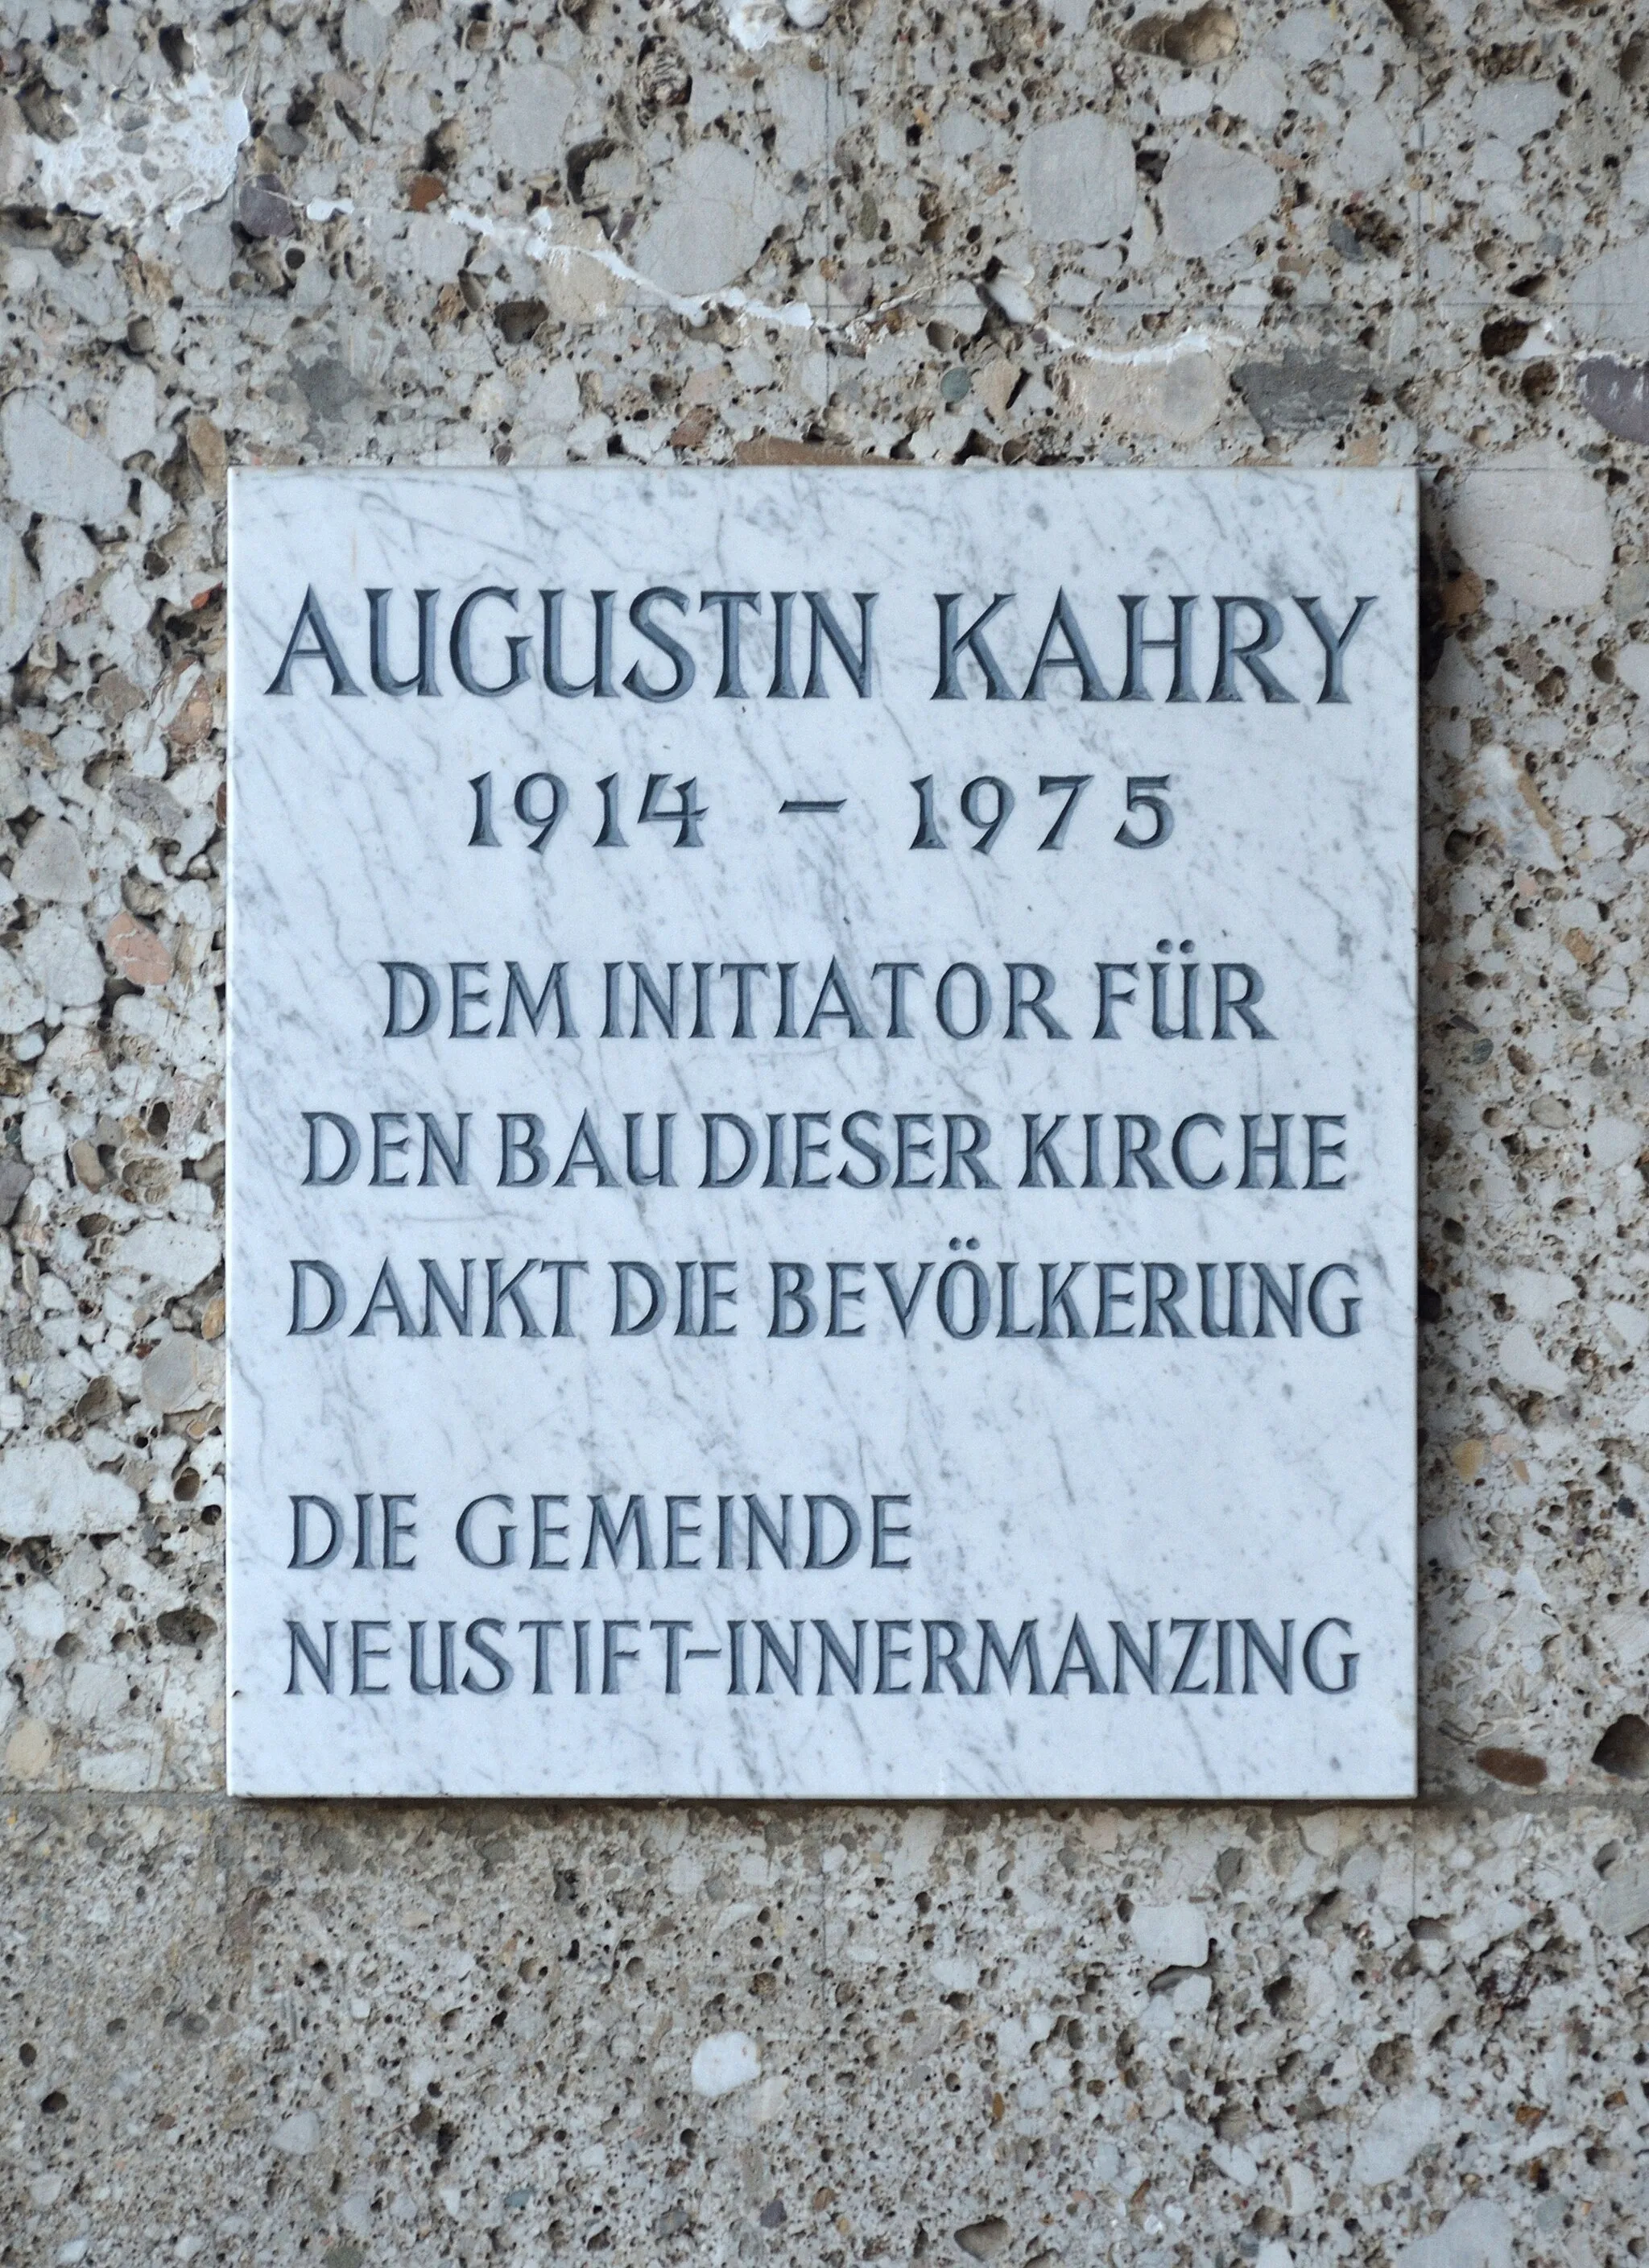 Photo showing: Memorial plaque for Augustin Kahry, the initiator for building the St. Augustine church in Neustift-Innermanzing, Lower Austria.